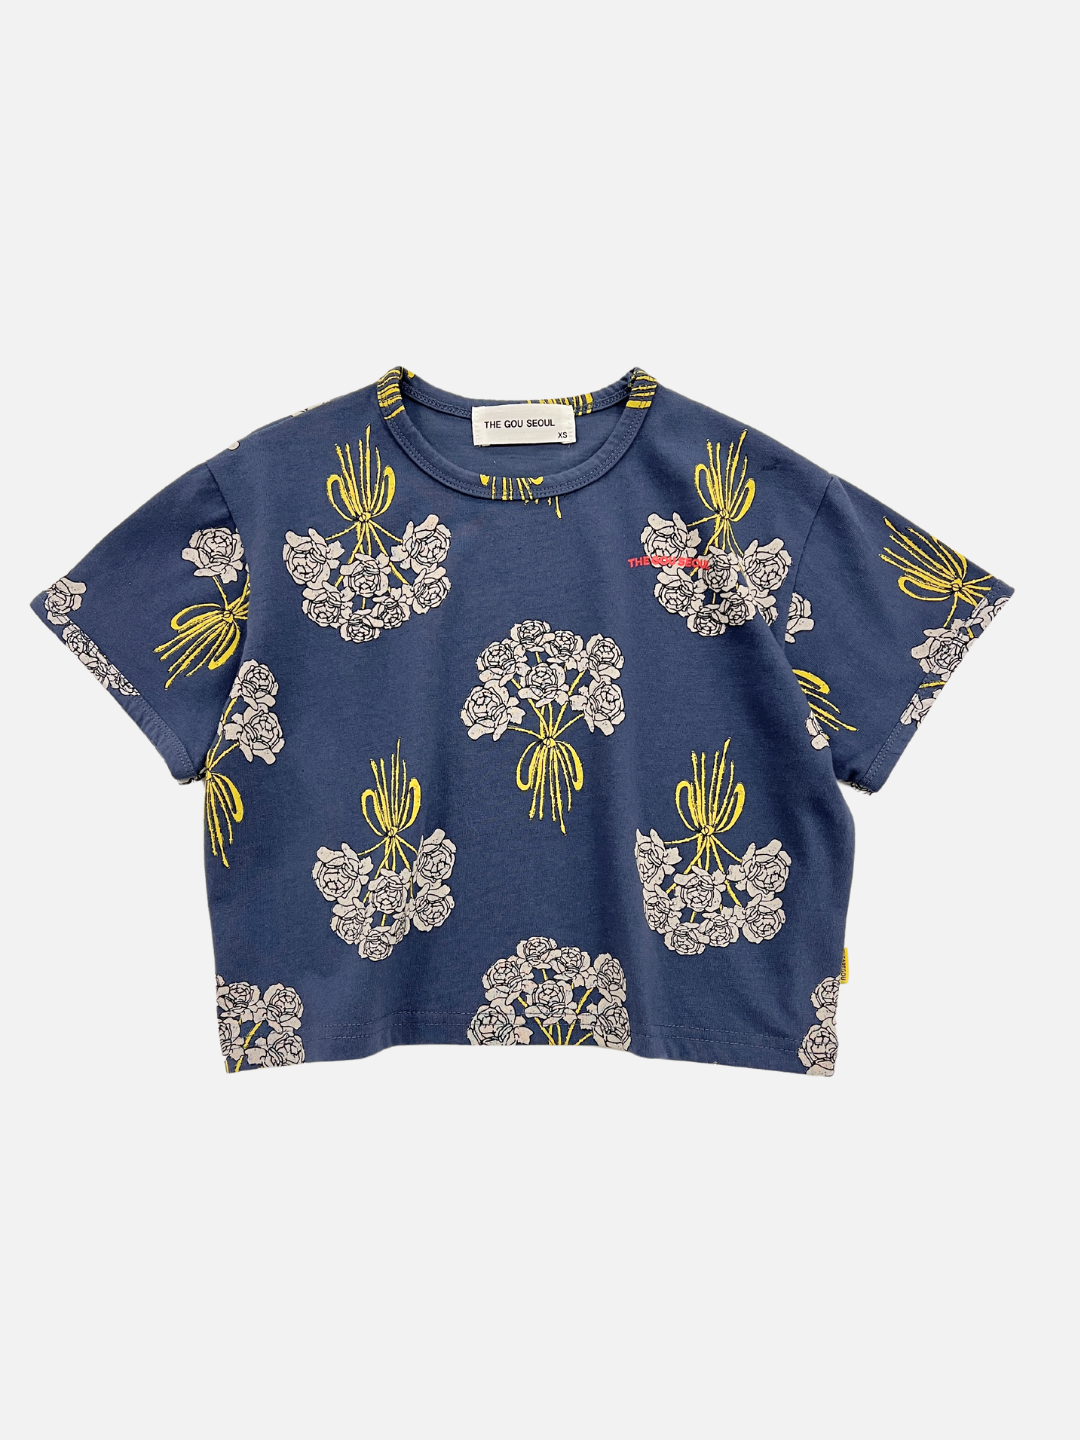 Navy | A front view of the kids' Bouquet Tee in Navy. Navy background with white bouquets of roses all over. The Gou Should logo in red on the right side of the tee. 